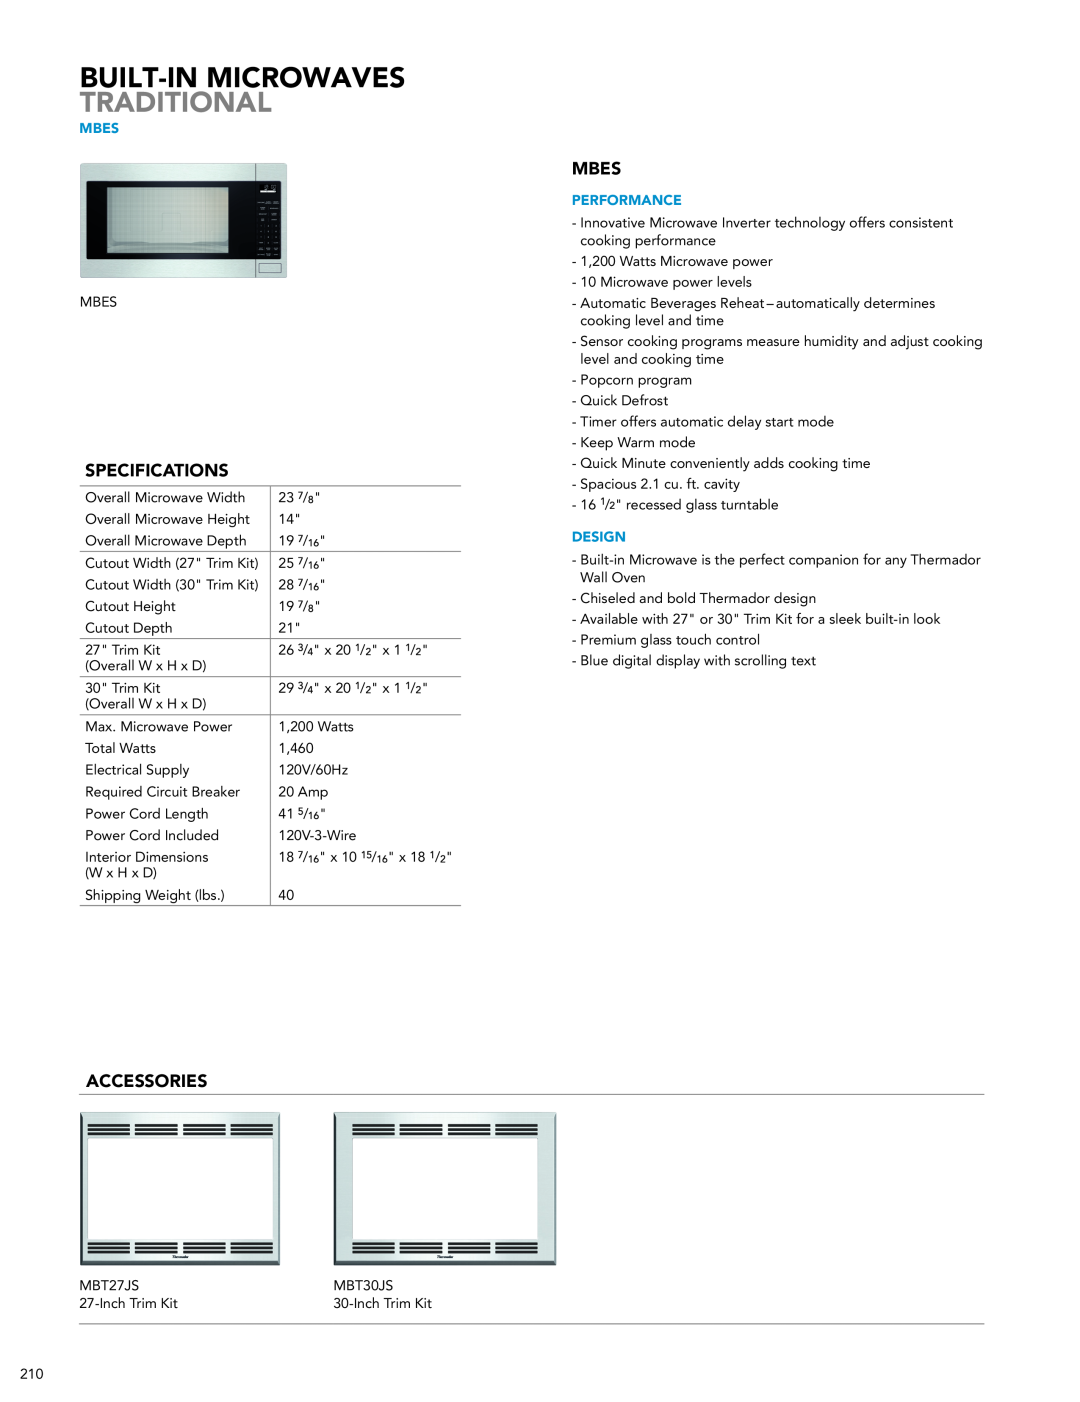 Thermador MD24JS manual Built-In Microwaves Traditional, Specifications, Accessories, Mbes, Performance, Design 